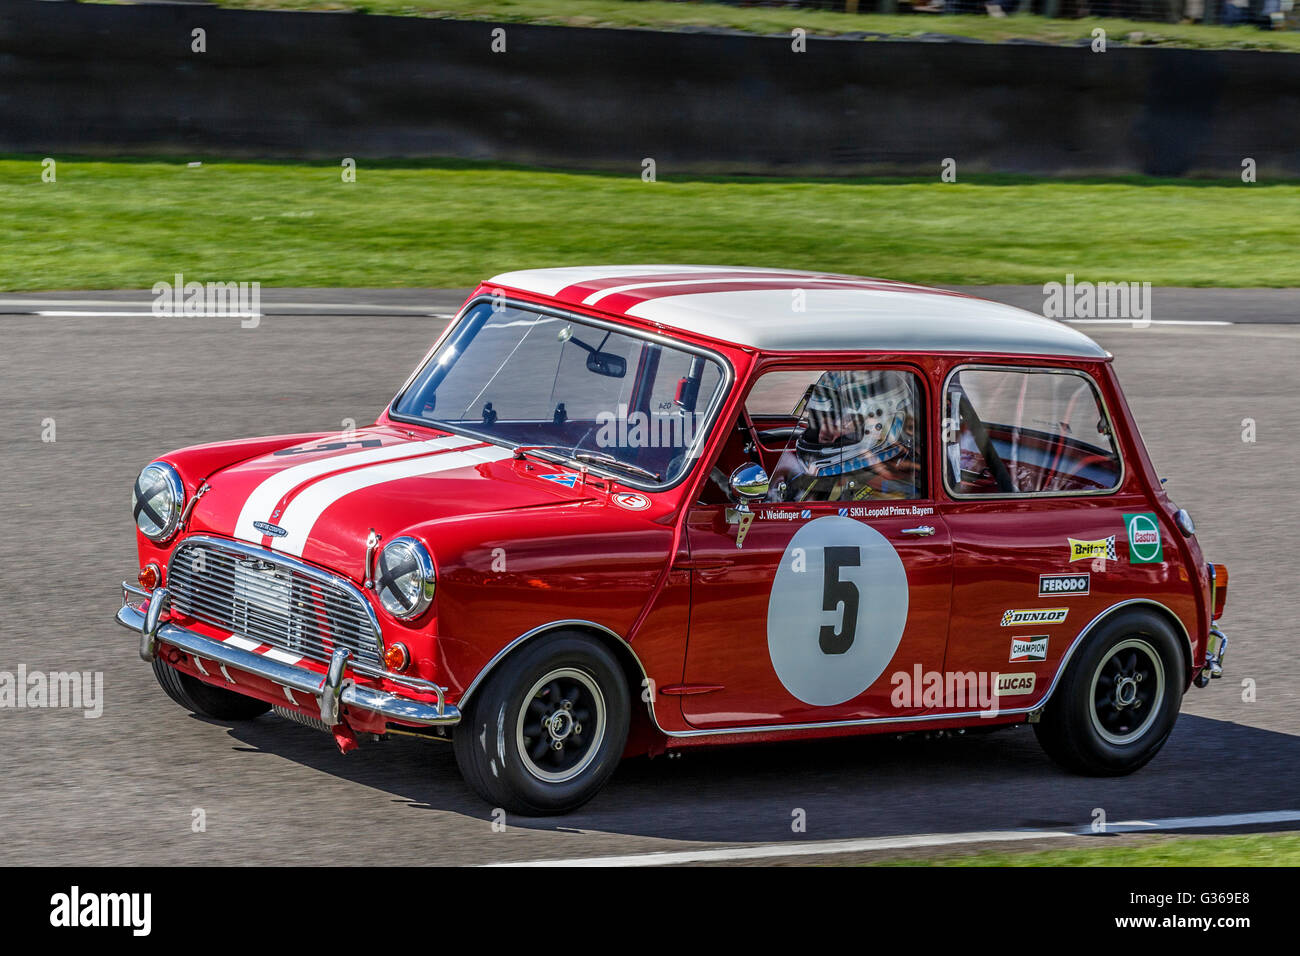 1964 Austin Mini Cooper S with driver Joeg Weidinger, St Mary's Trophy race, 2015 Goodwood Revival, Sussex, UK. Stock Photo